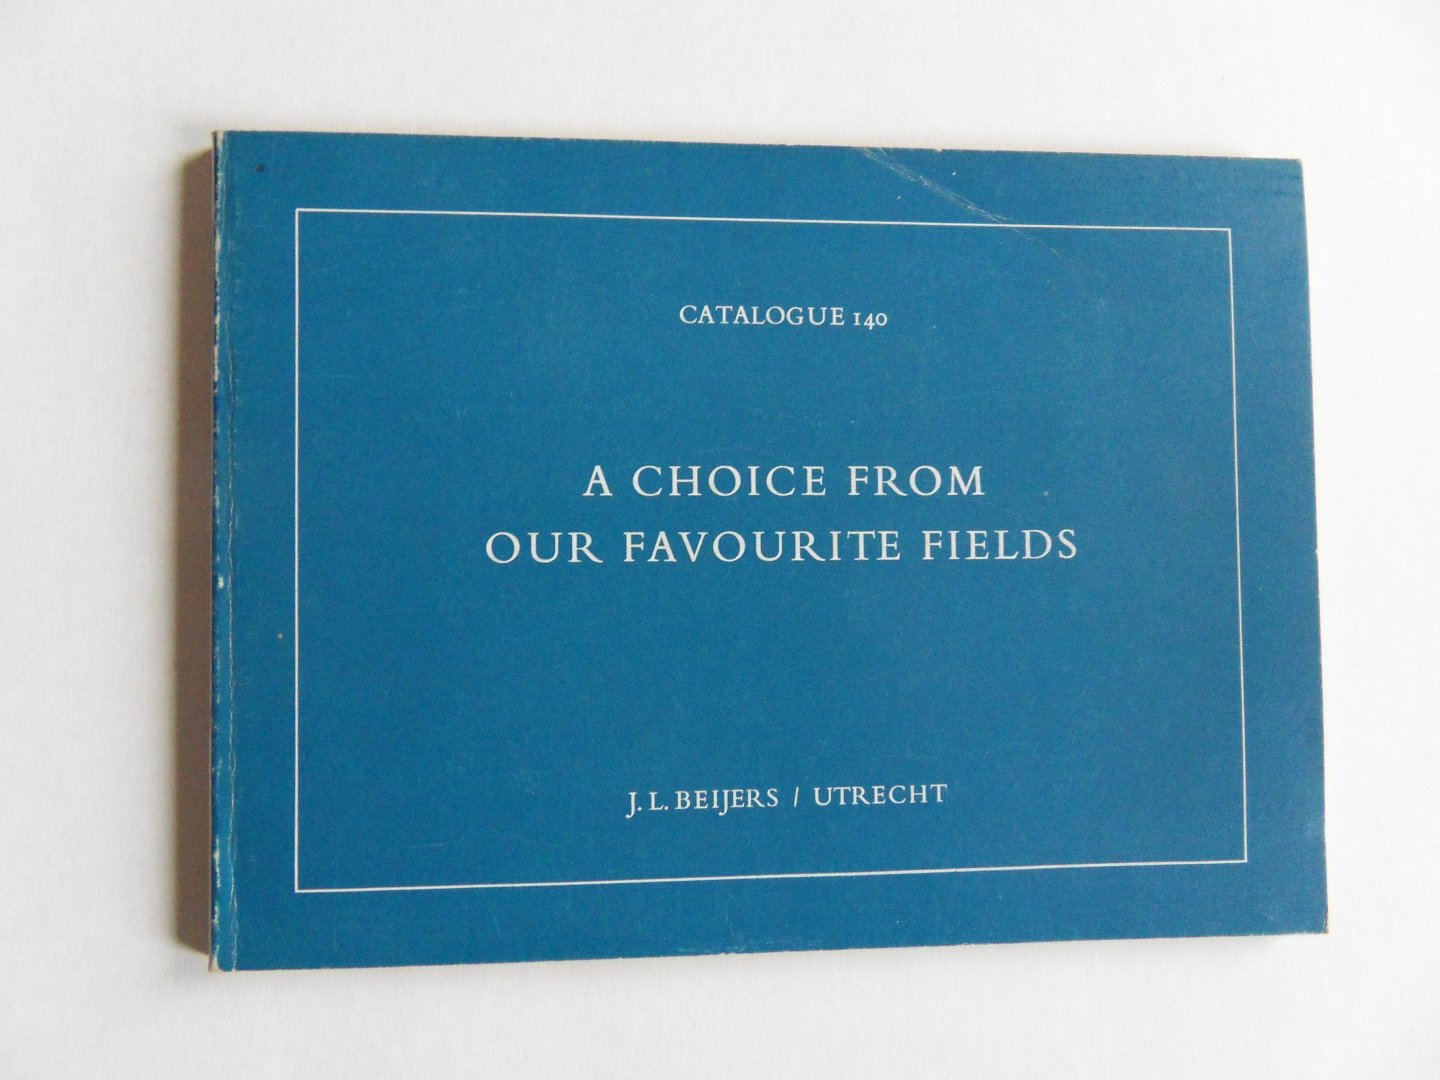 Beijers, J.L. - Catalogue 140. - A Choice from our Favourite Fields.